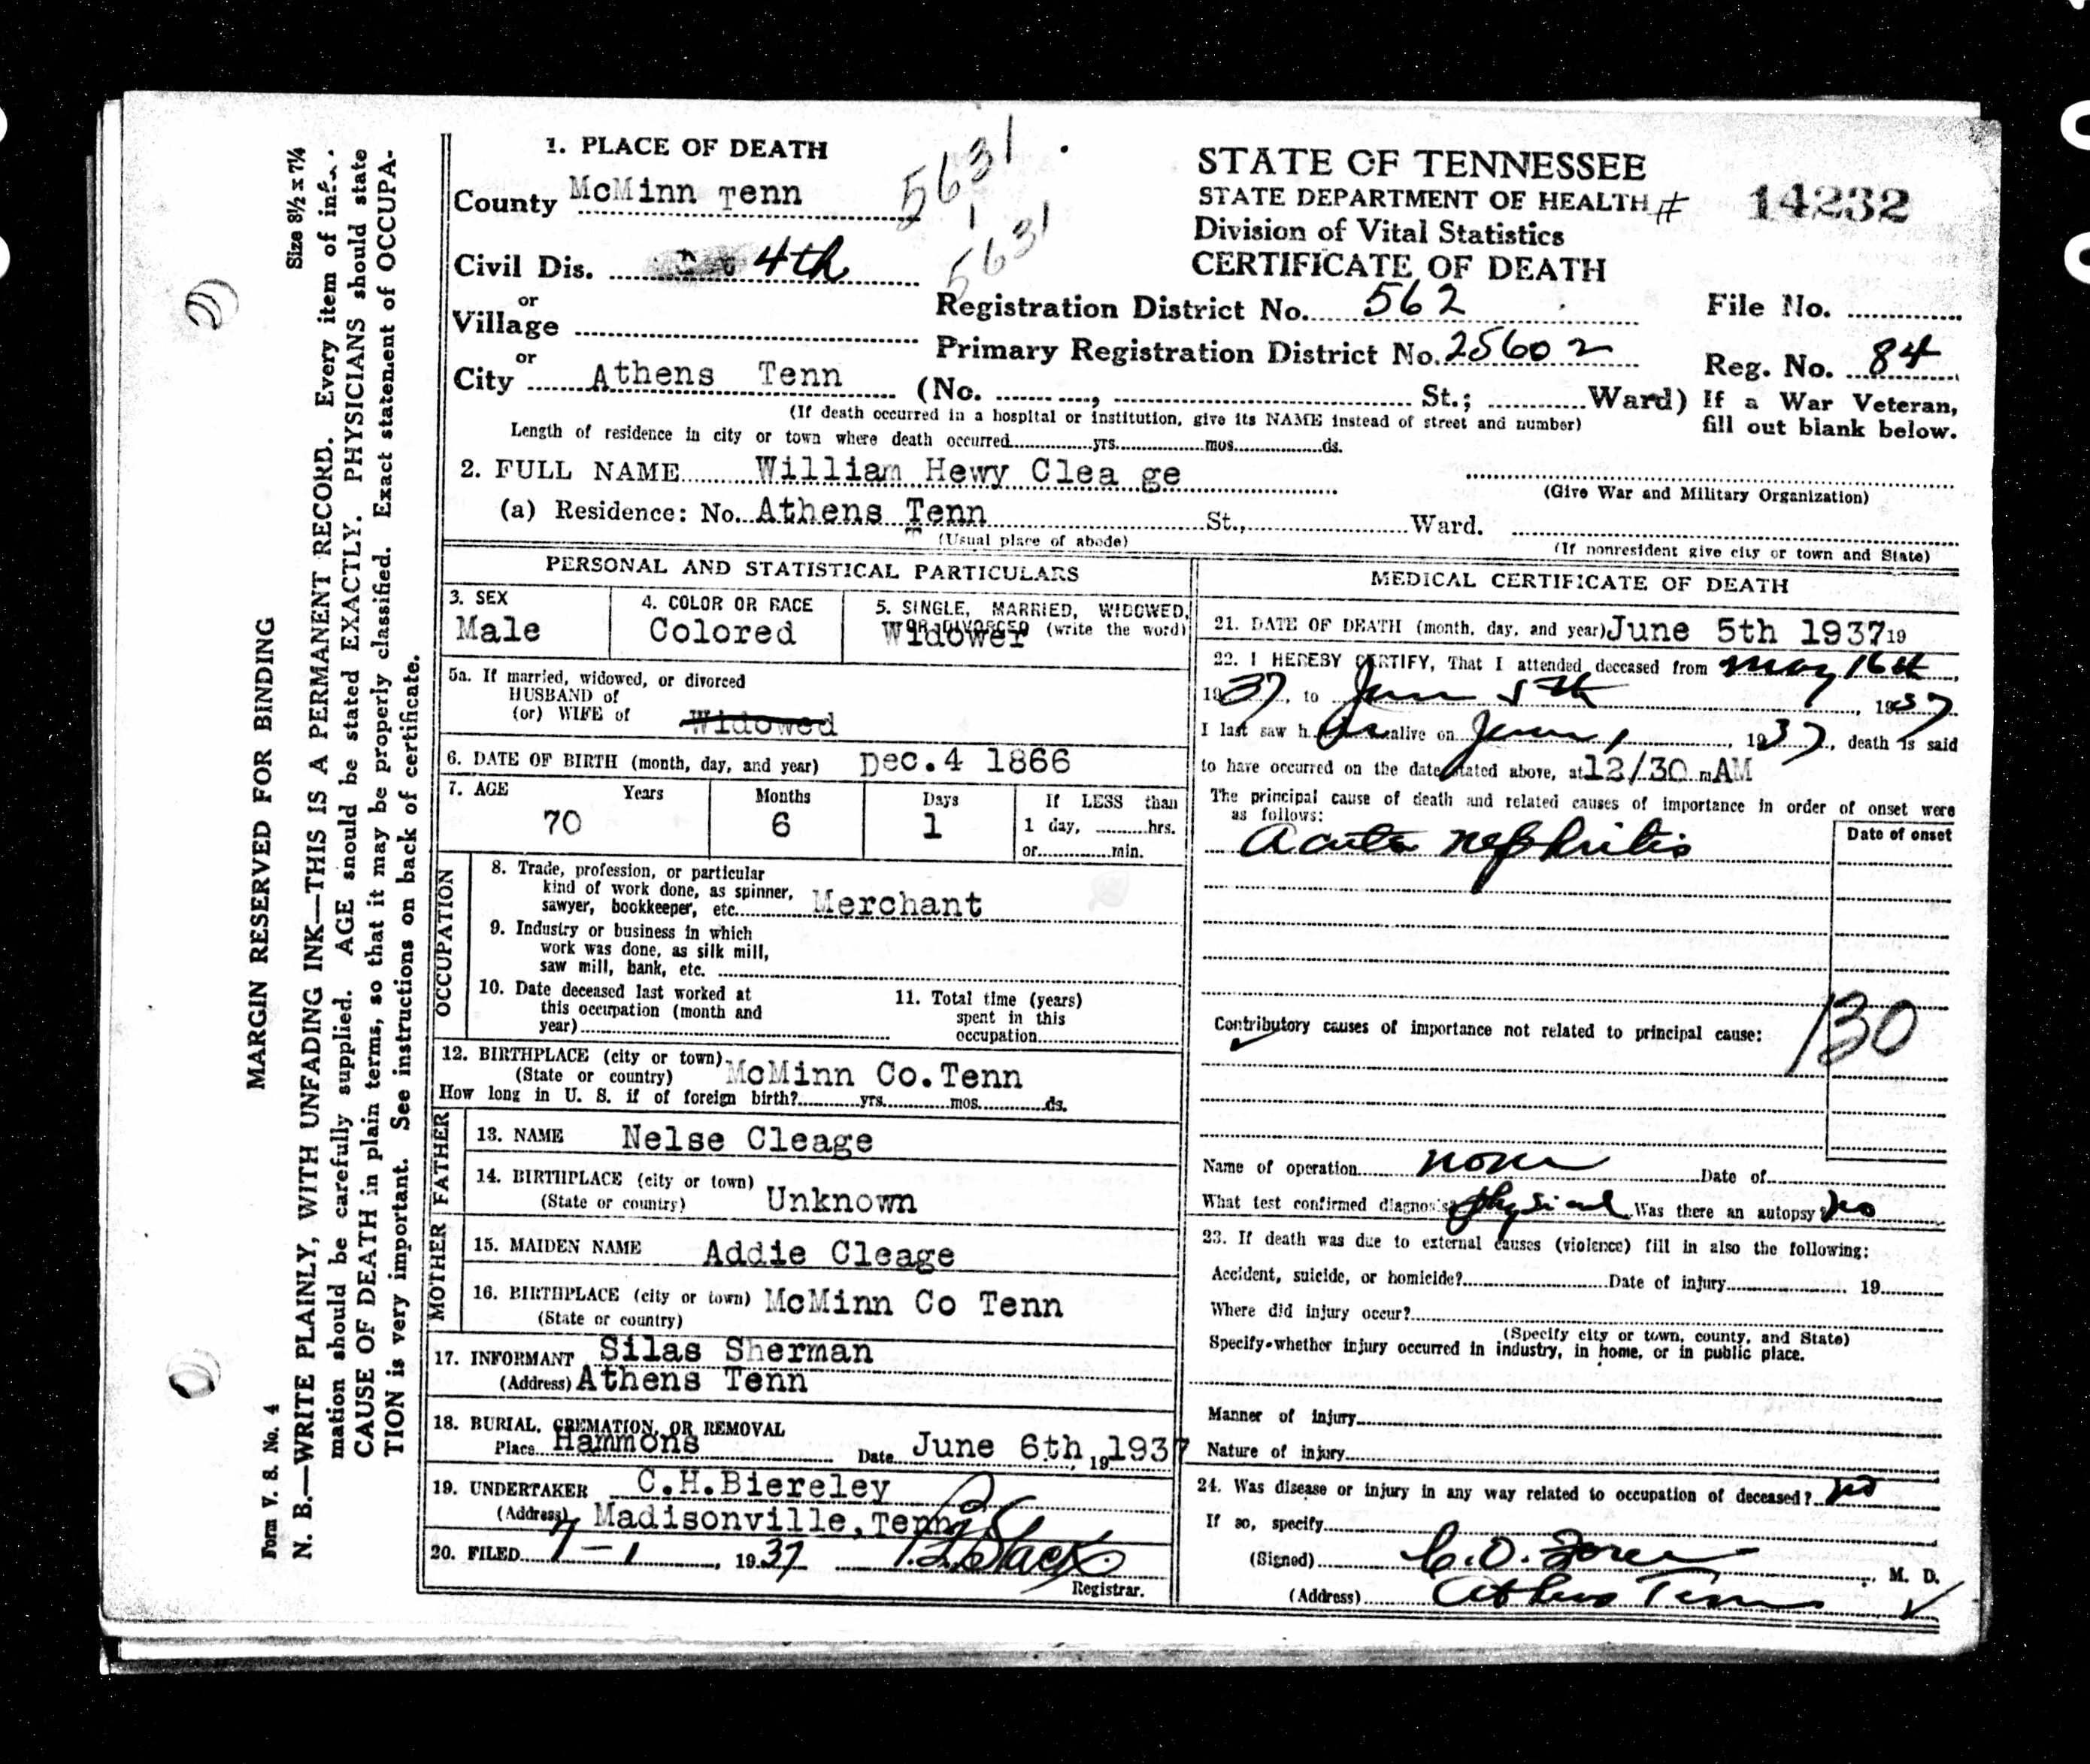 Death Certificate for William Henry Cleage